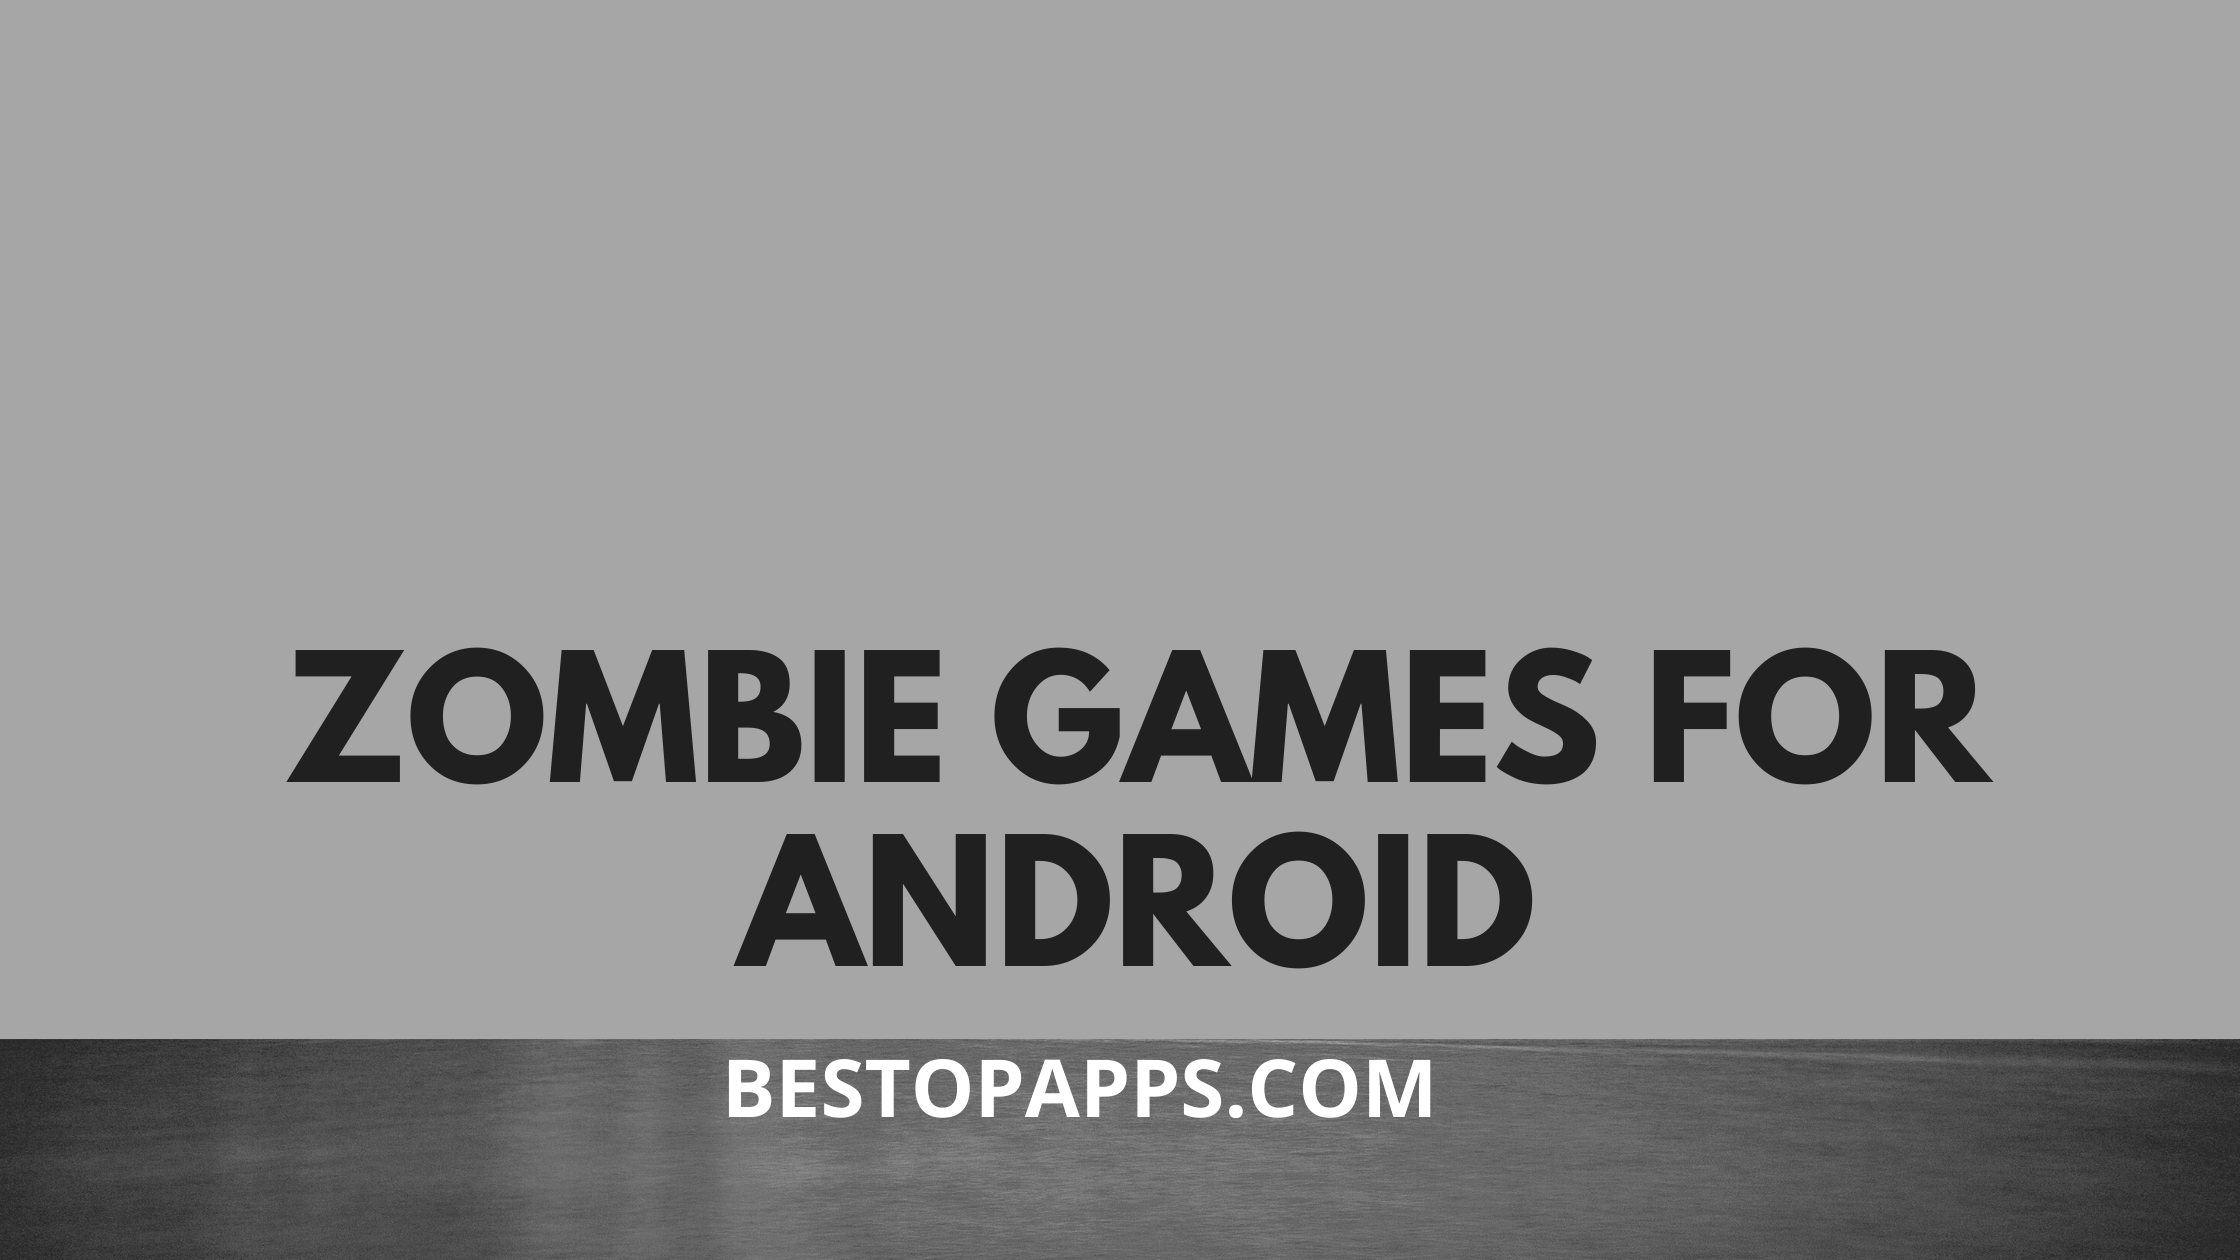 Zombie Games for Android